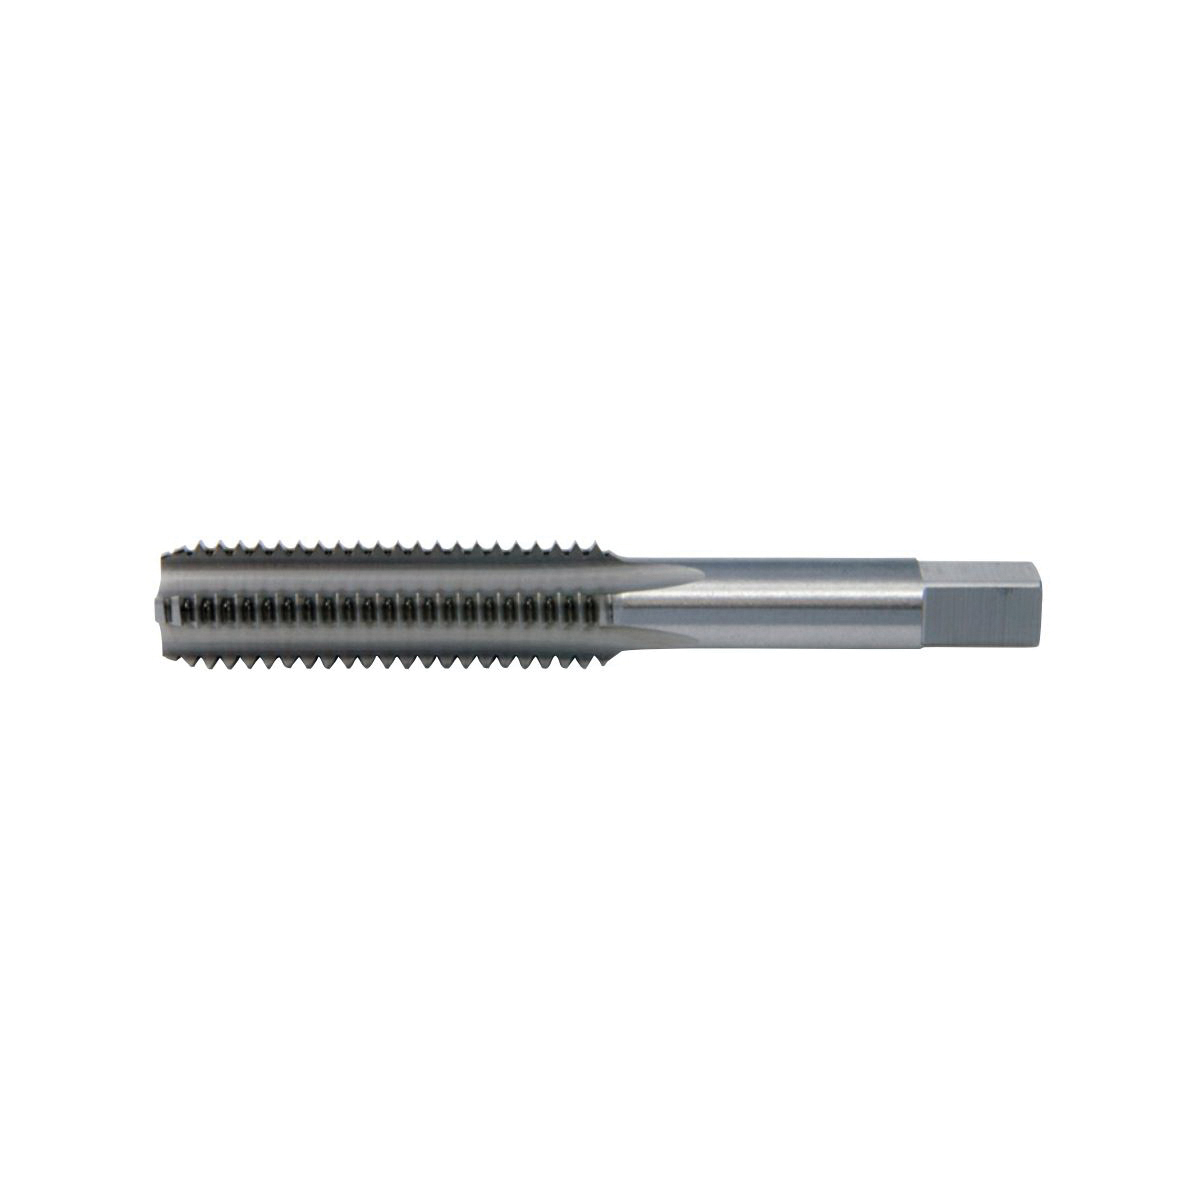 Cle-Line® C62083 0403 General Purpose Standard Straight Flute Hand Tap, Right Hand Cutting, 5/8-18 Thread, H3 Thread Limit, Bottoming Chamfer, 2 Flutes, Bright, HSS